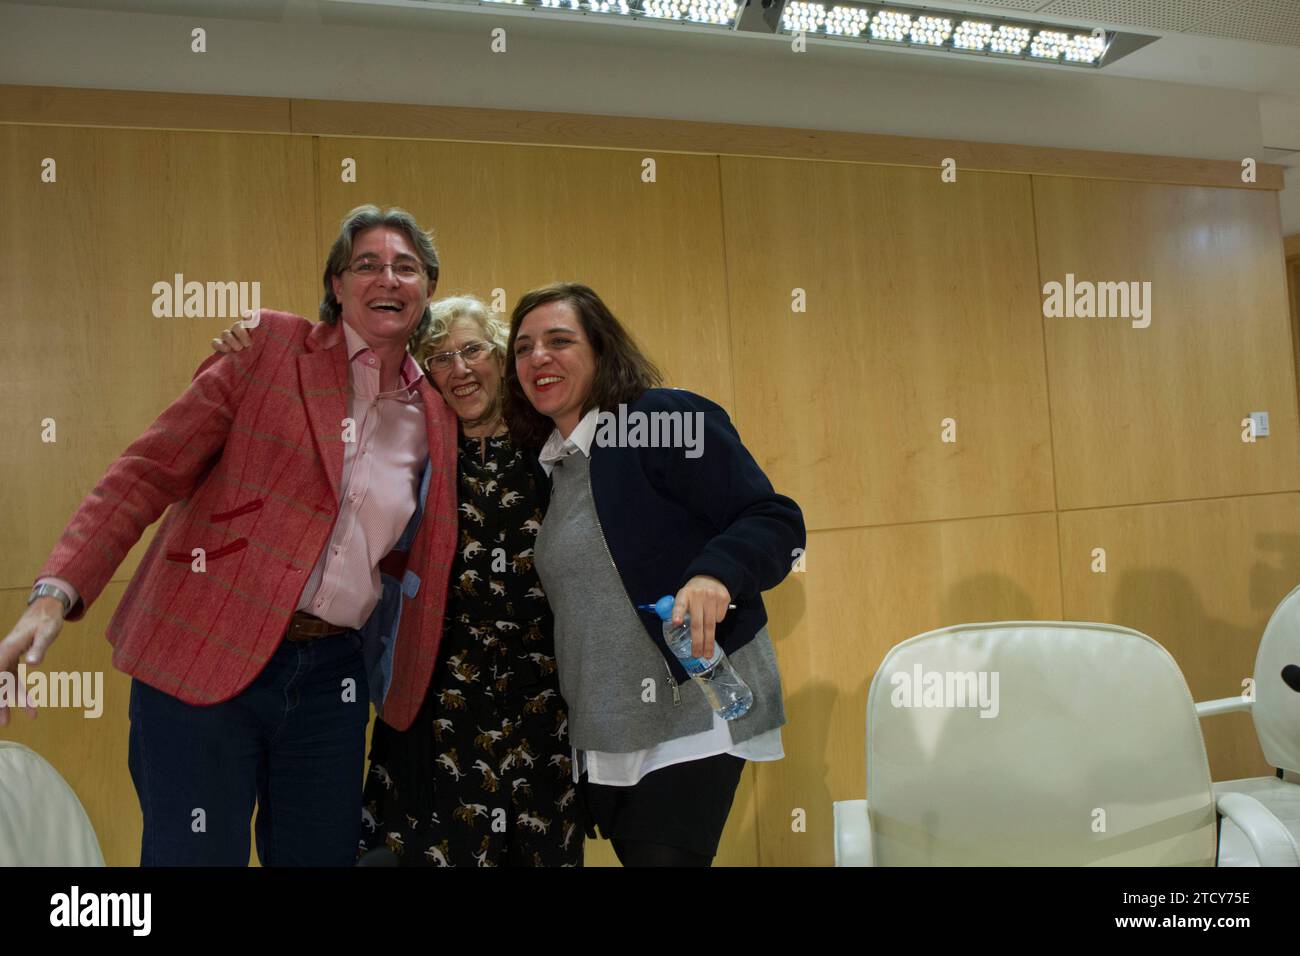 Madrid, 03/15/2017. Press conference by Manuela Carmena, Marta Higueras and Celia Mayer, on the creation of a gender violence department. Photo: Isabel Permuy ARCHDC. Credit: Album / Archivo ABC / Isabel B Permuy Stock Photo